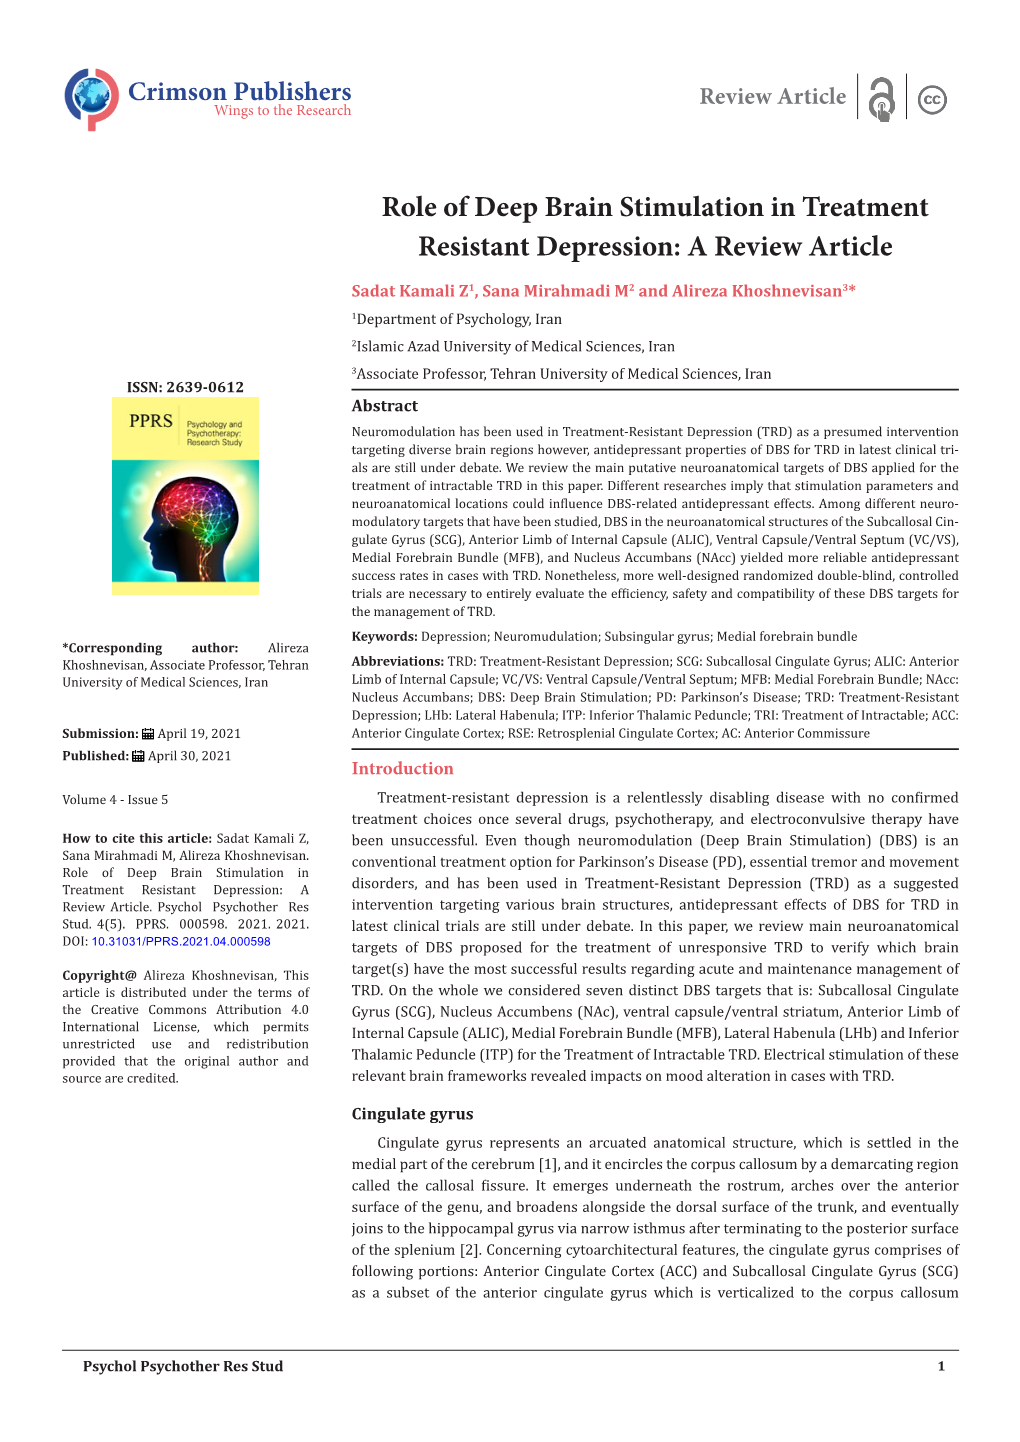 Role of Deep Brain Stimulation in Treatment Resistant Depression: a Review Article